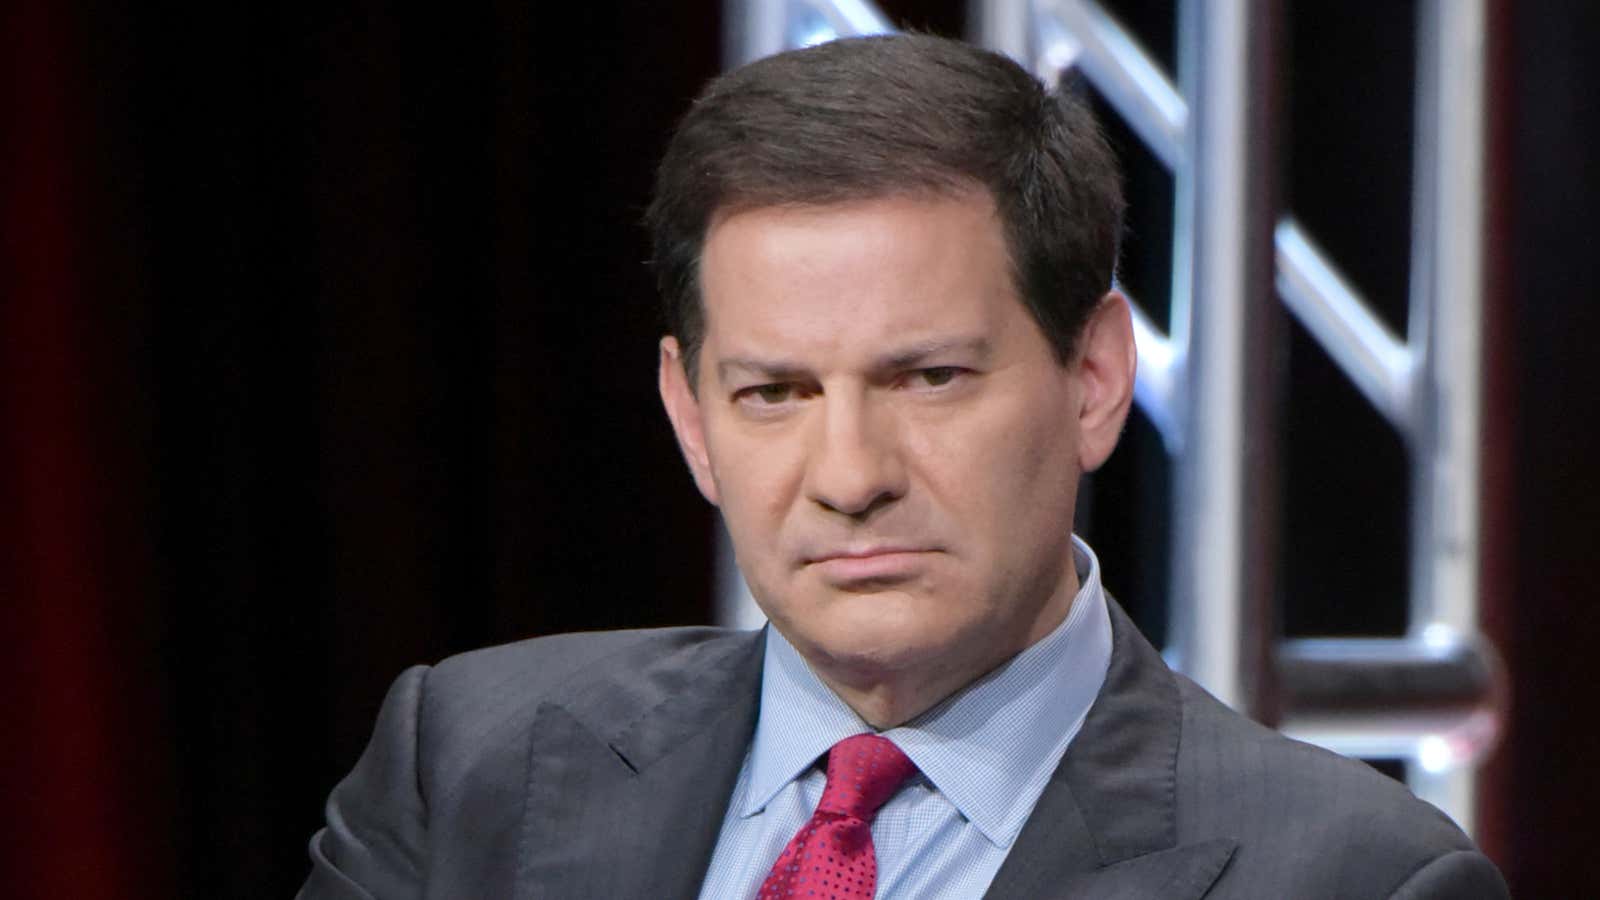 Mark Halperin was not the first—and he certainly isn’t the last.